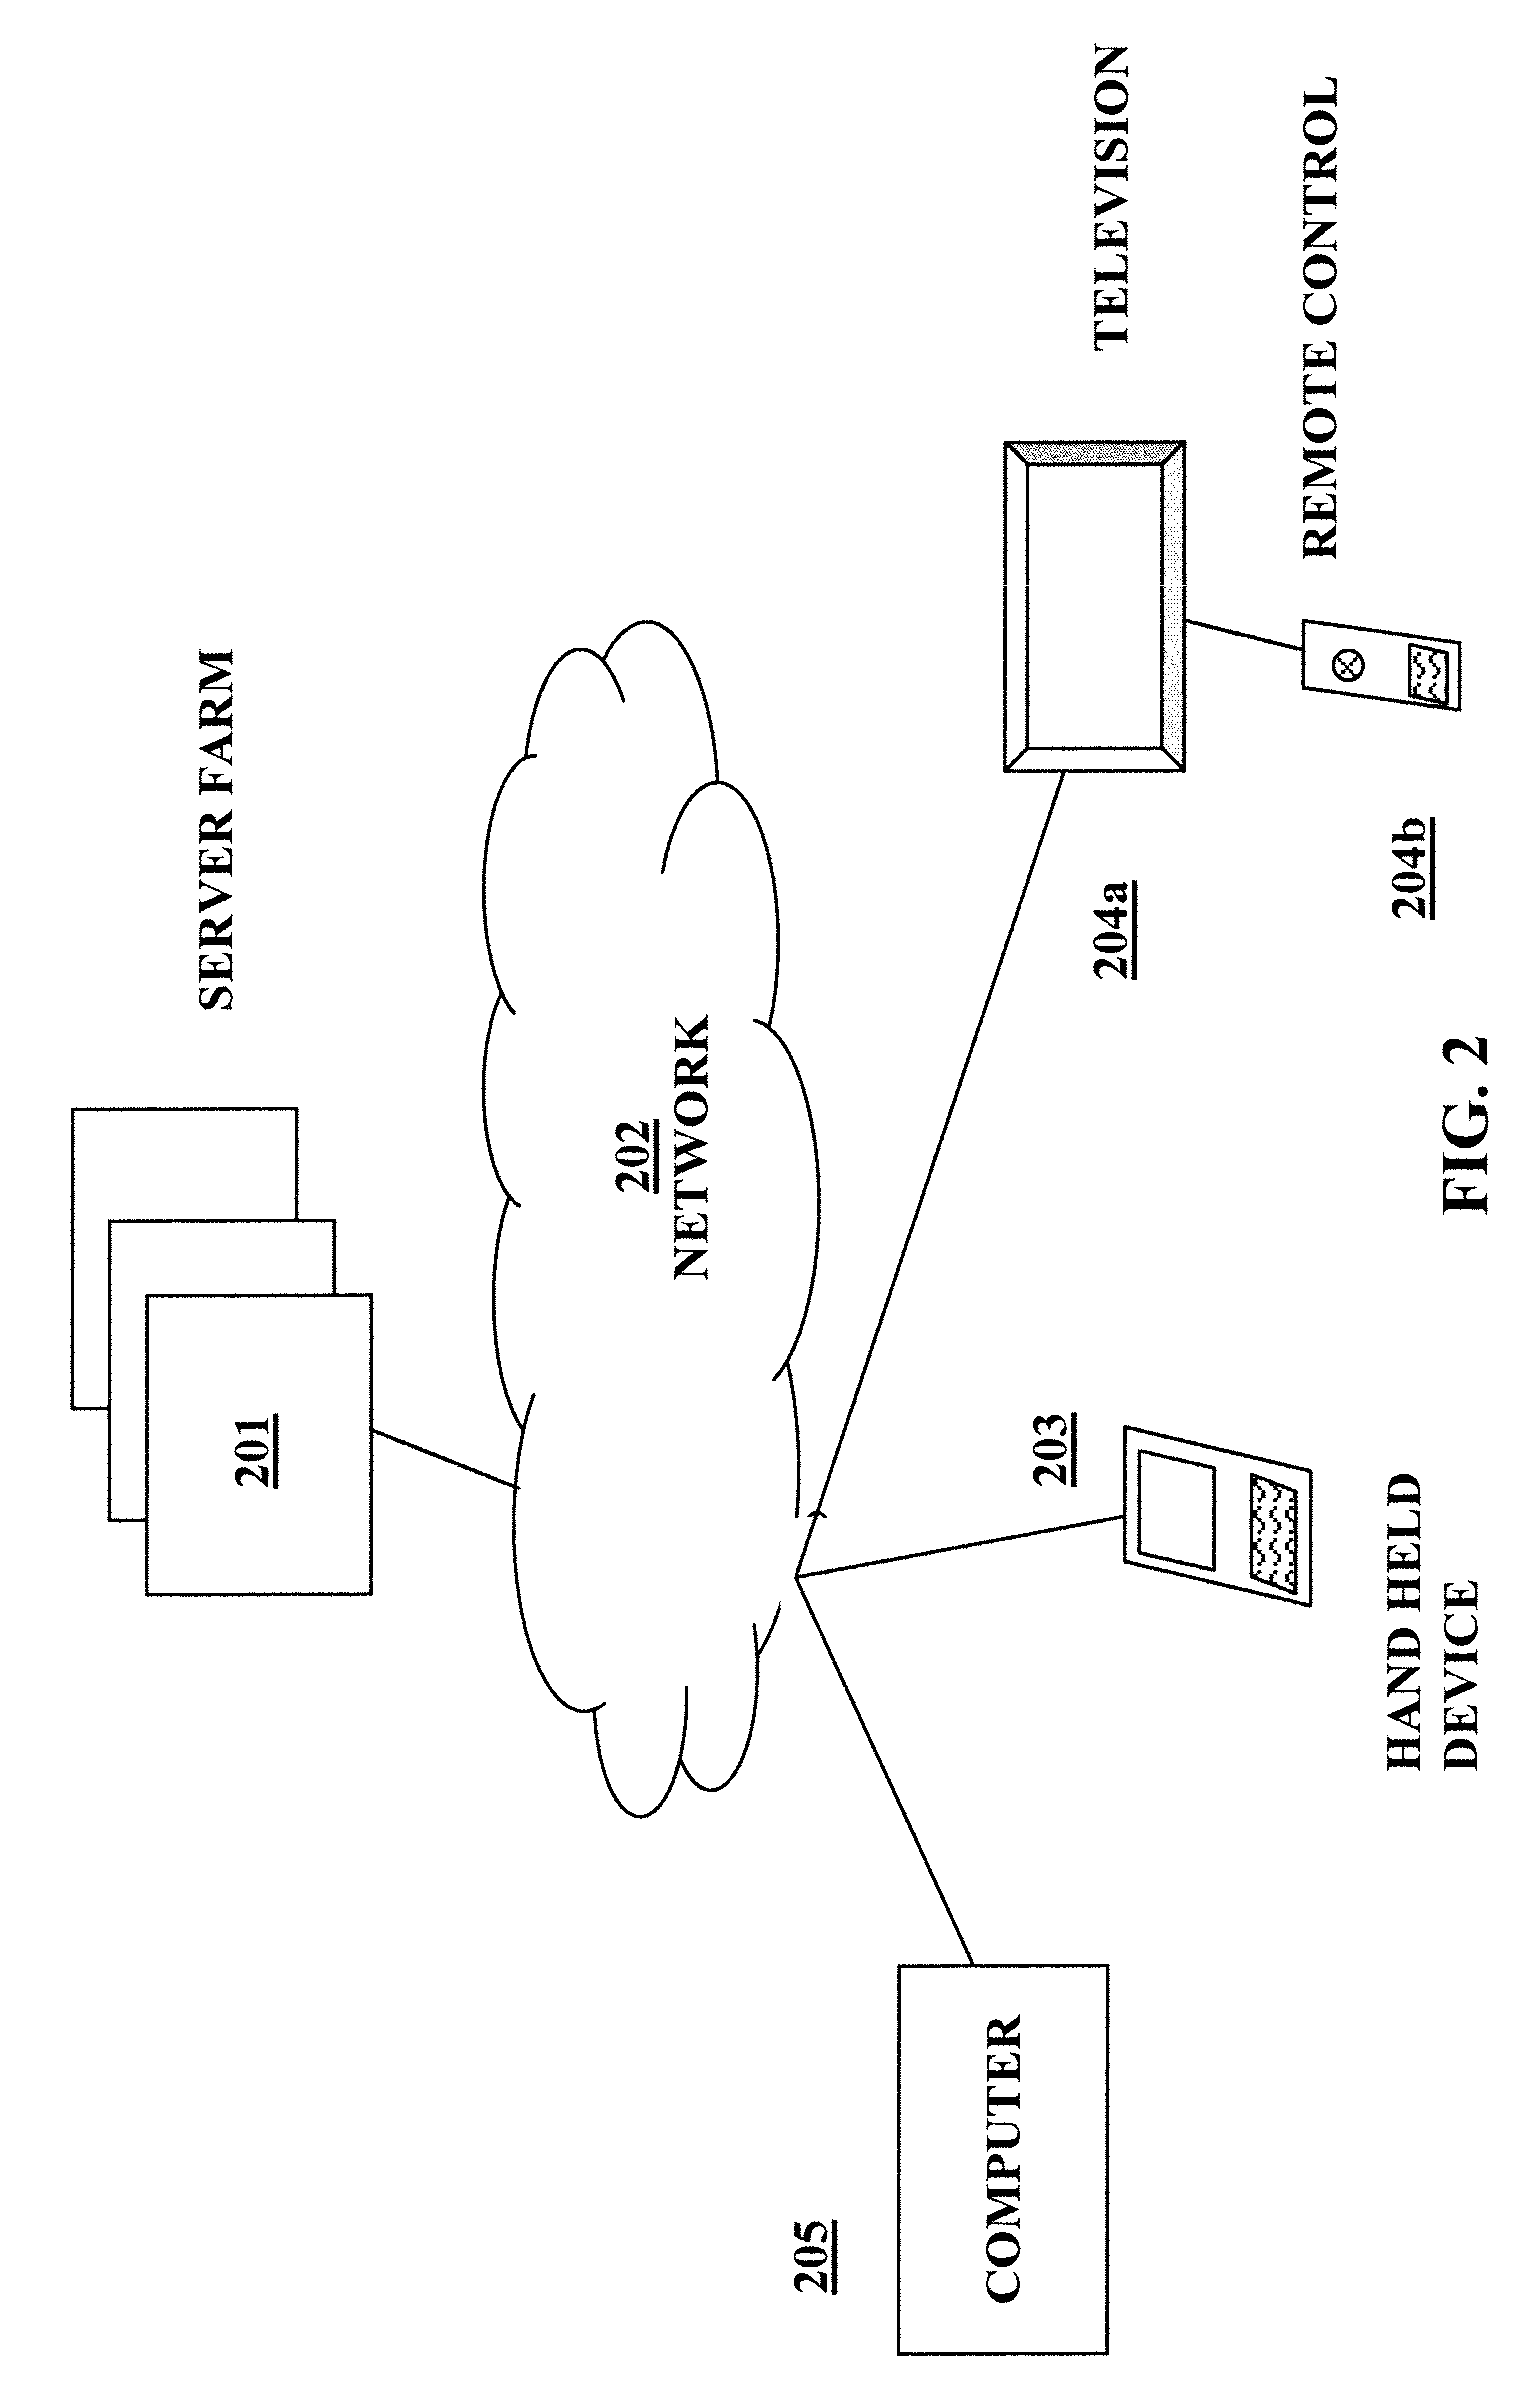 Methods and systems for transmission of subsequences of incremental query actions and selection of content items based on later received subsequences